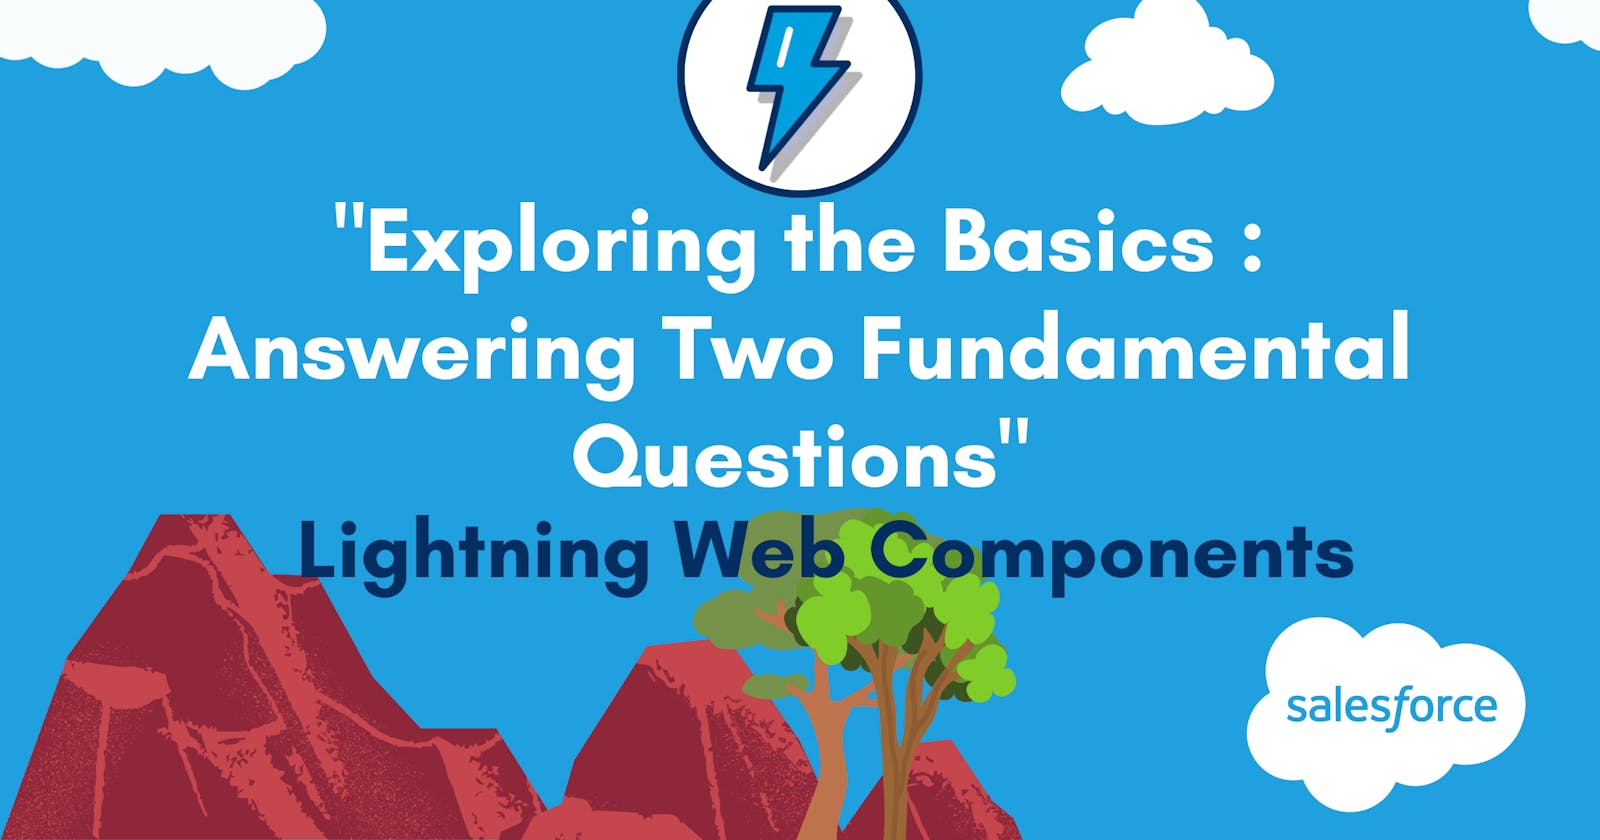 "Exploring the Basics of Lightning Web Components: Answering Two Fundamental Questions"